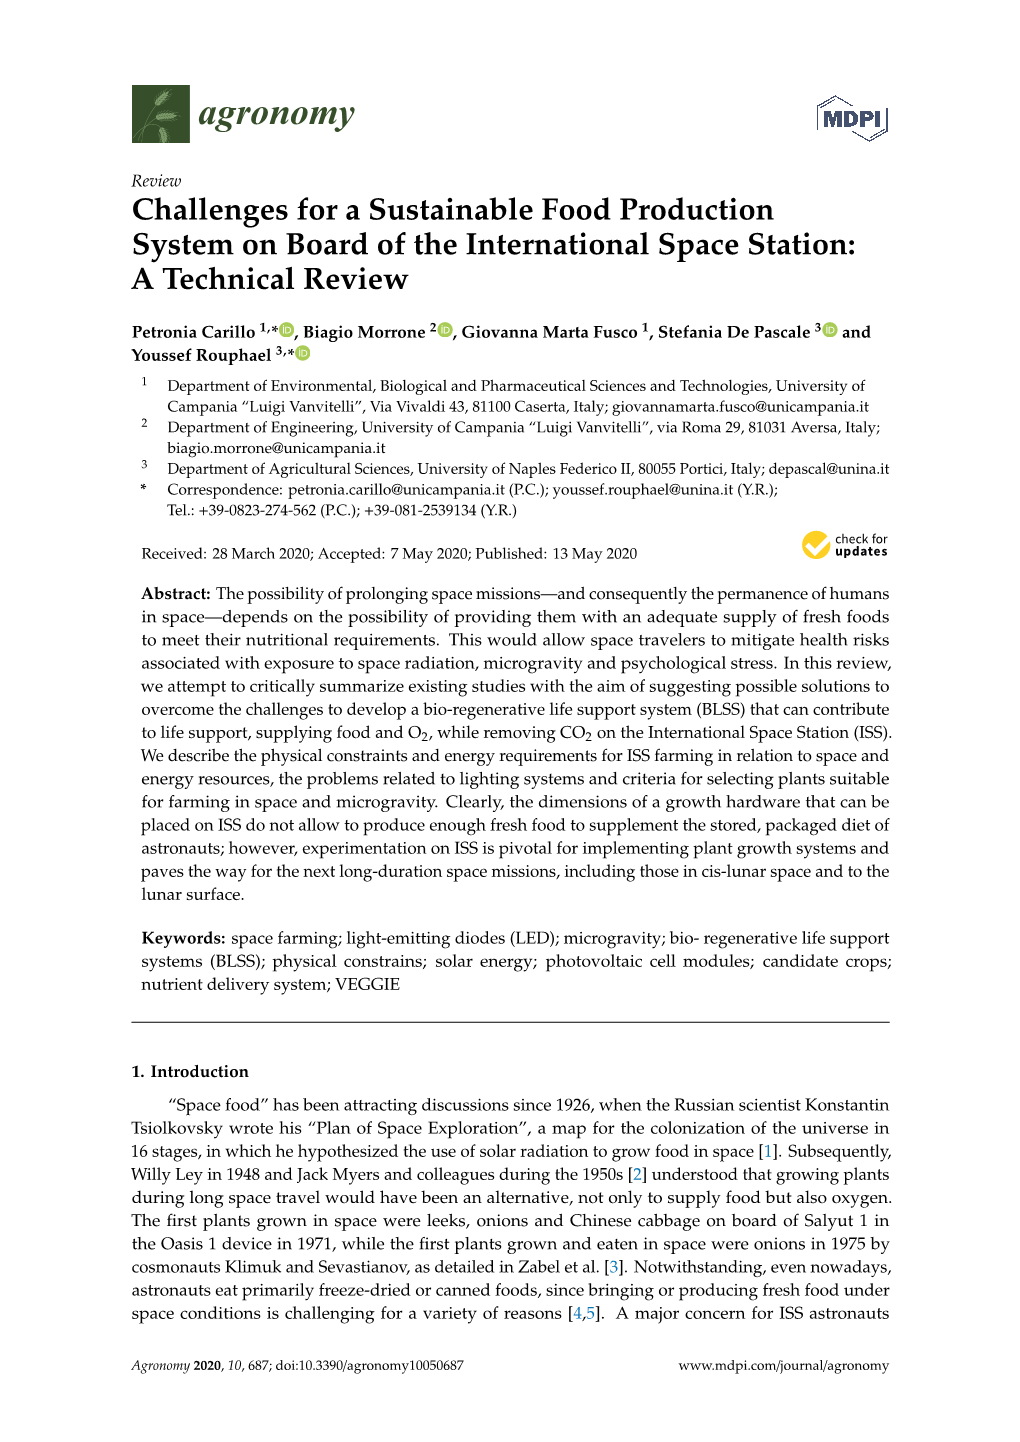 Challenges for a Sustainable Food Production System on Board of the International Space Station: a Technical Review